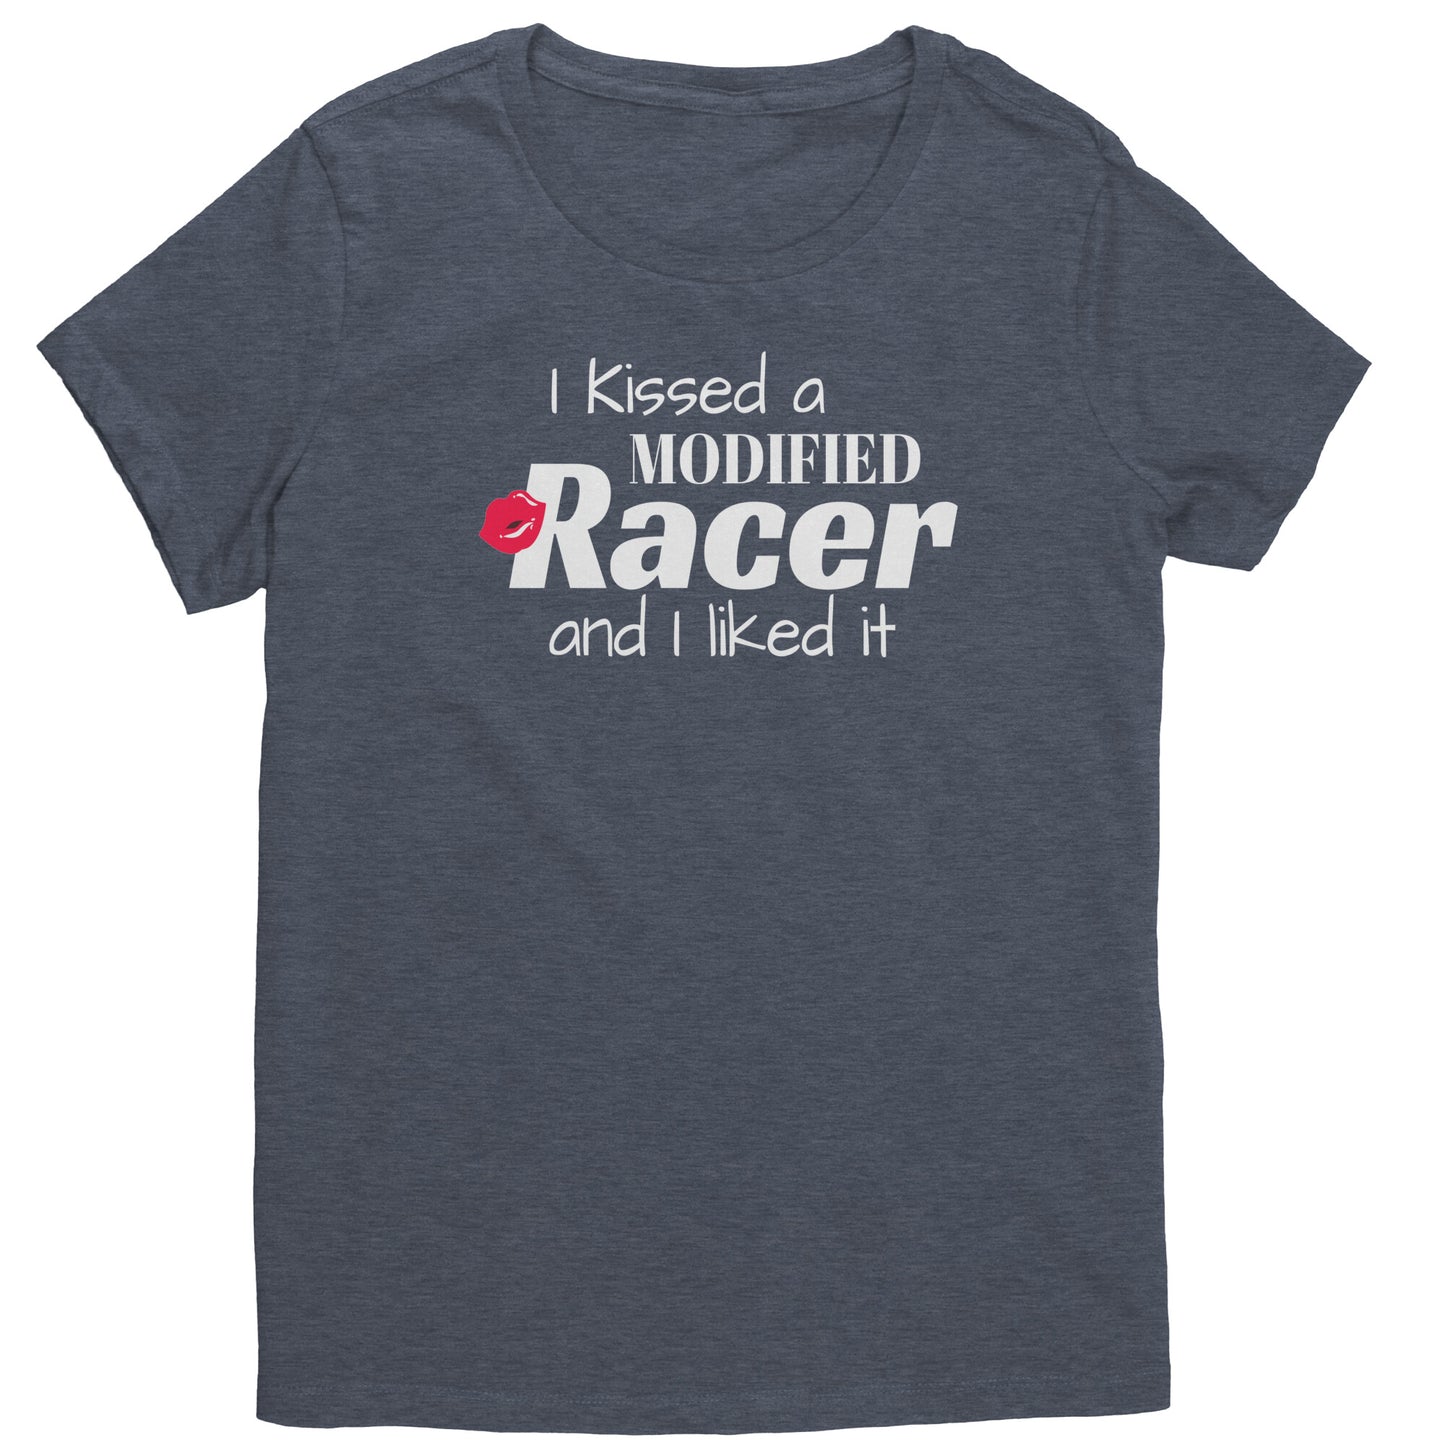 I KISSED A MODIFIED RACER AND I LIKED IT WOMEN T-SHIRT